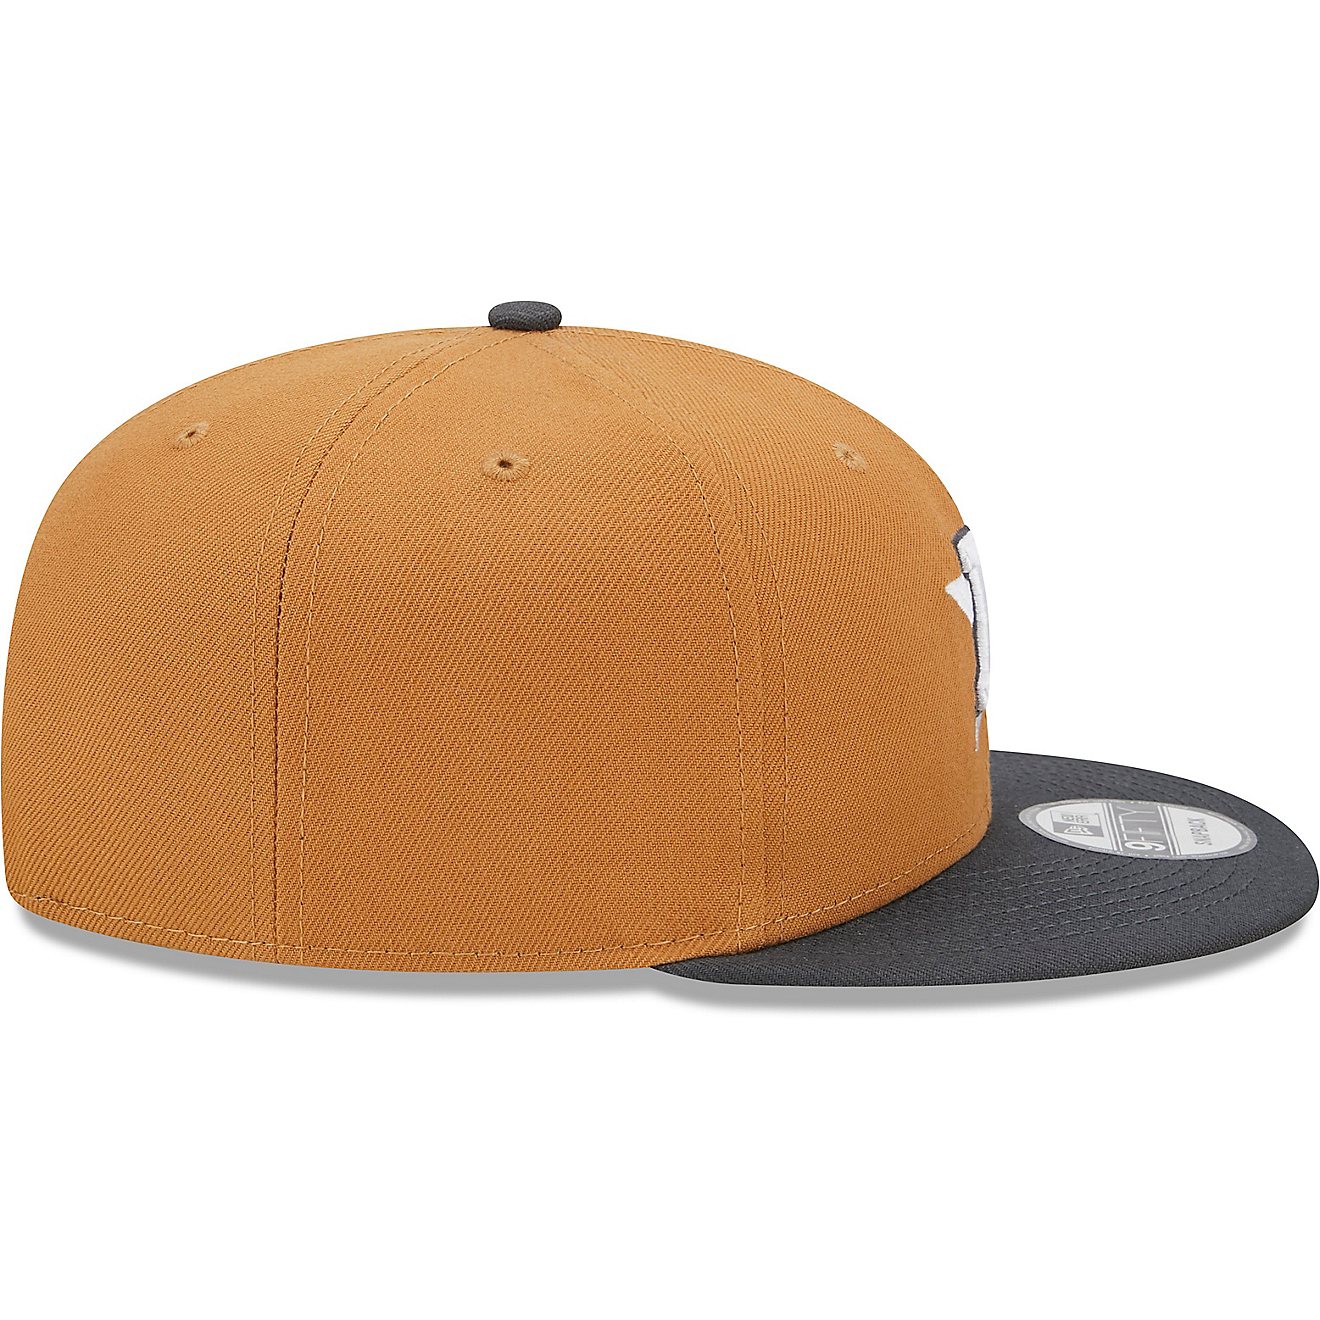 New Era Men's Houston Astros 2-Tone Pack 9FIFTY Cap                                                                              - view number 4